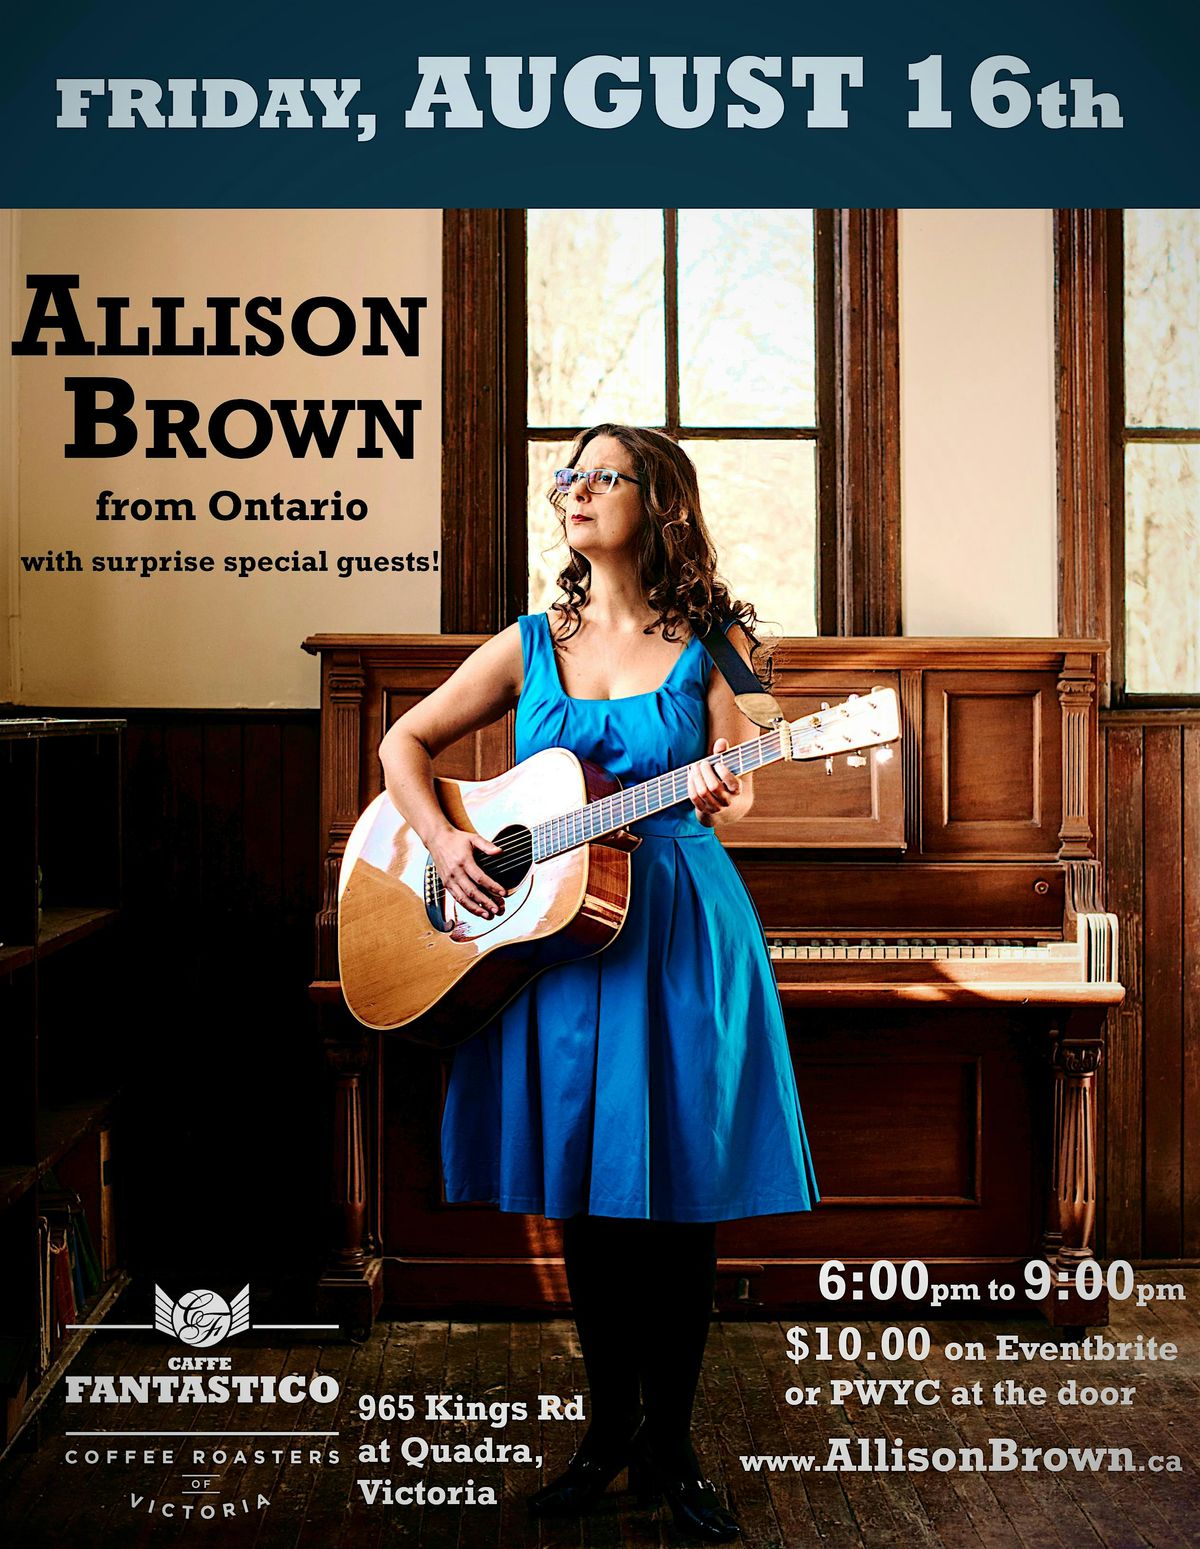 Allison Brown at Caffe Fantastico, Friday, August 16th